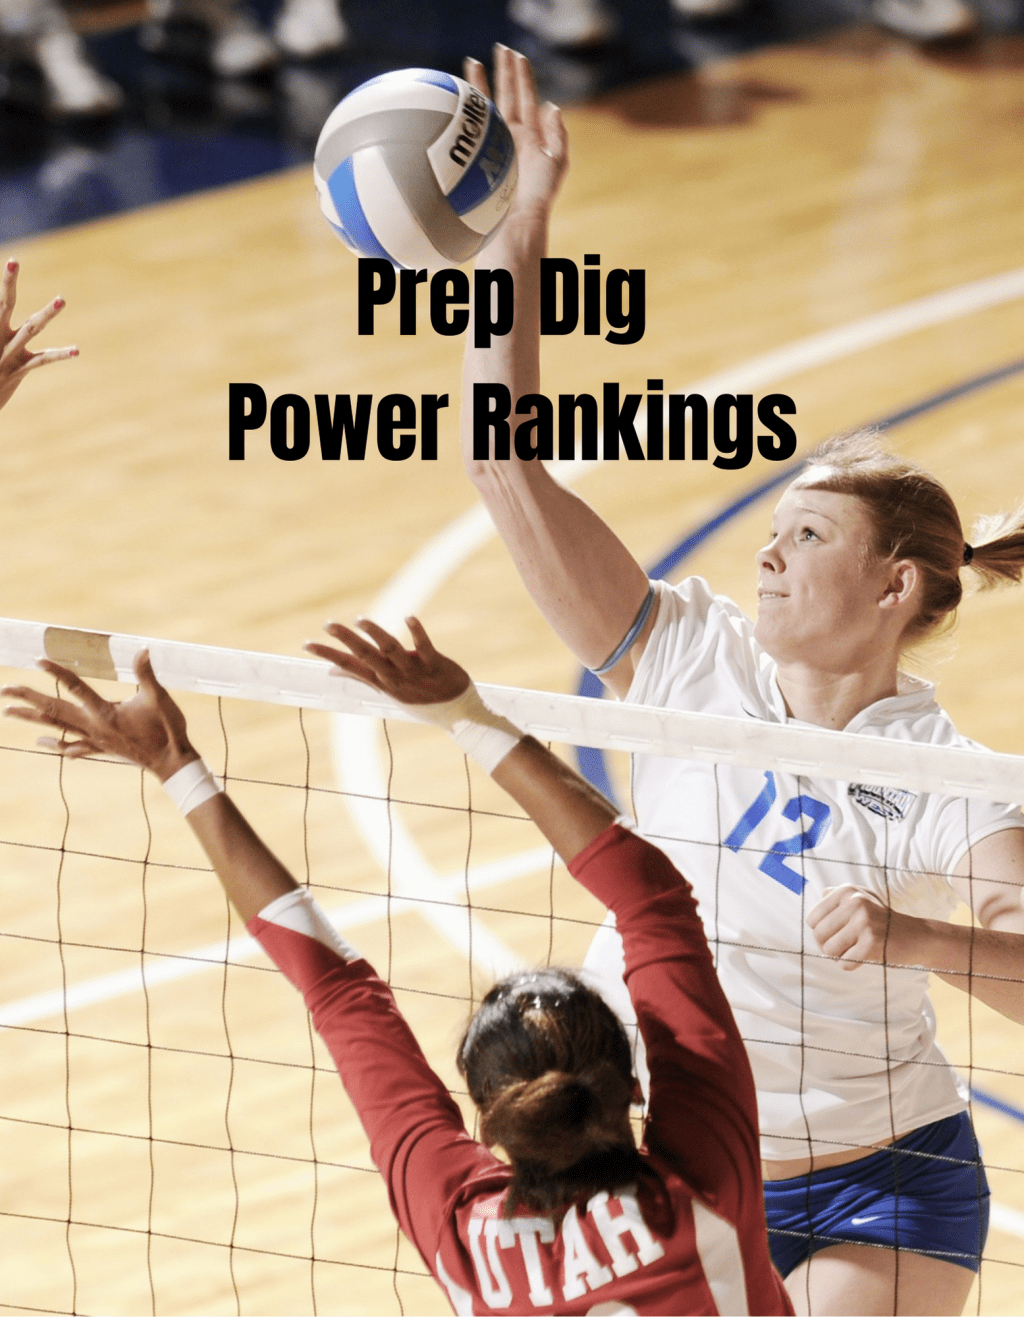 There is a New Number 1! Prep Dig Power Rankings